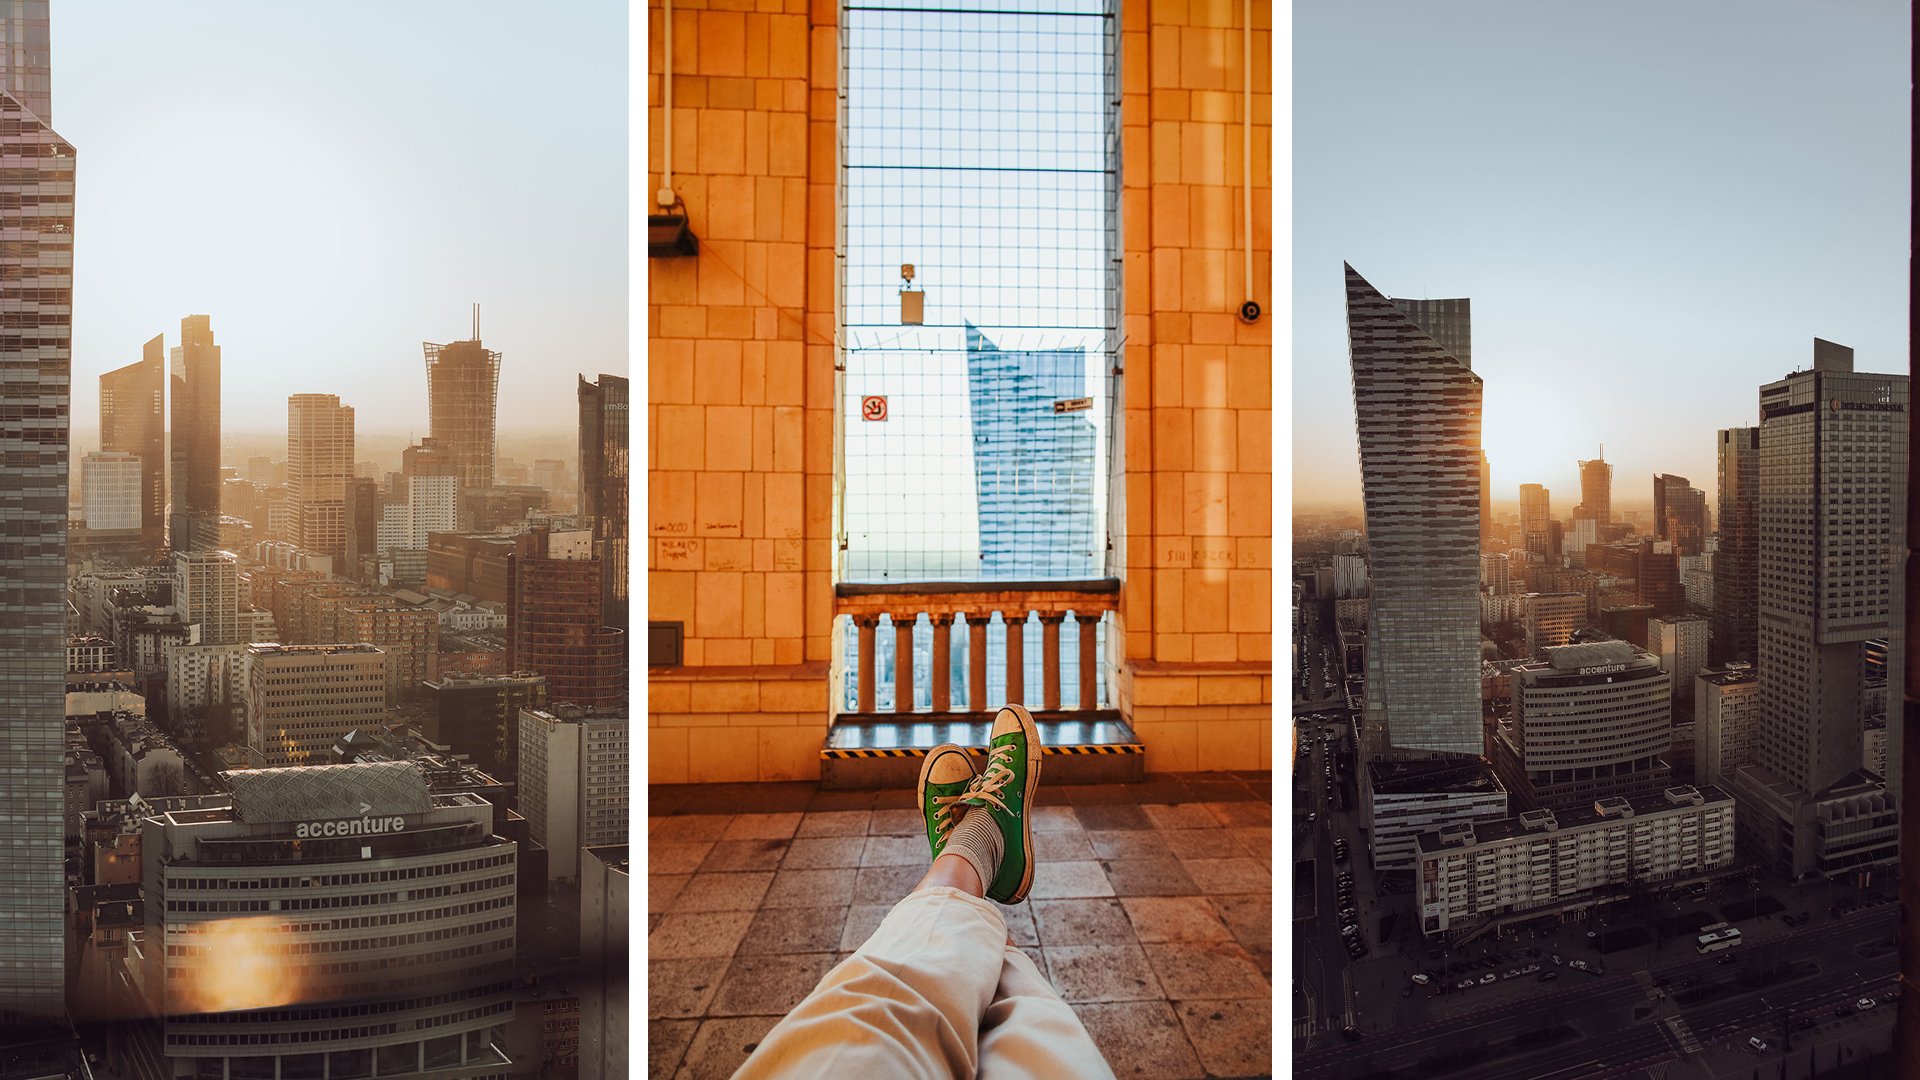 Three vertical photos in one picture, all taken from the observation deck on the 30th floor of the Palace of Culture and Science that offers one of the best views in Warsaw, Poland. On the left, we see the view of Warsaw skyscrapers. In the middle, we see a woman's feet in sneakers in the foreground and a view from the observation platform in the background, with the skyscraper Zlota 44 peeking through. On the right, there is another view of Warsaw skyscrapers.